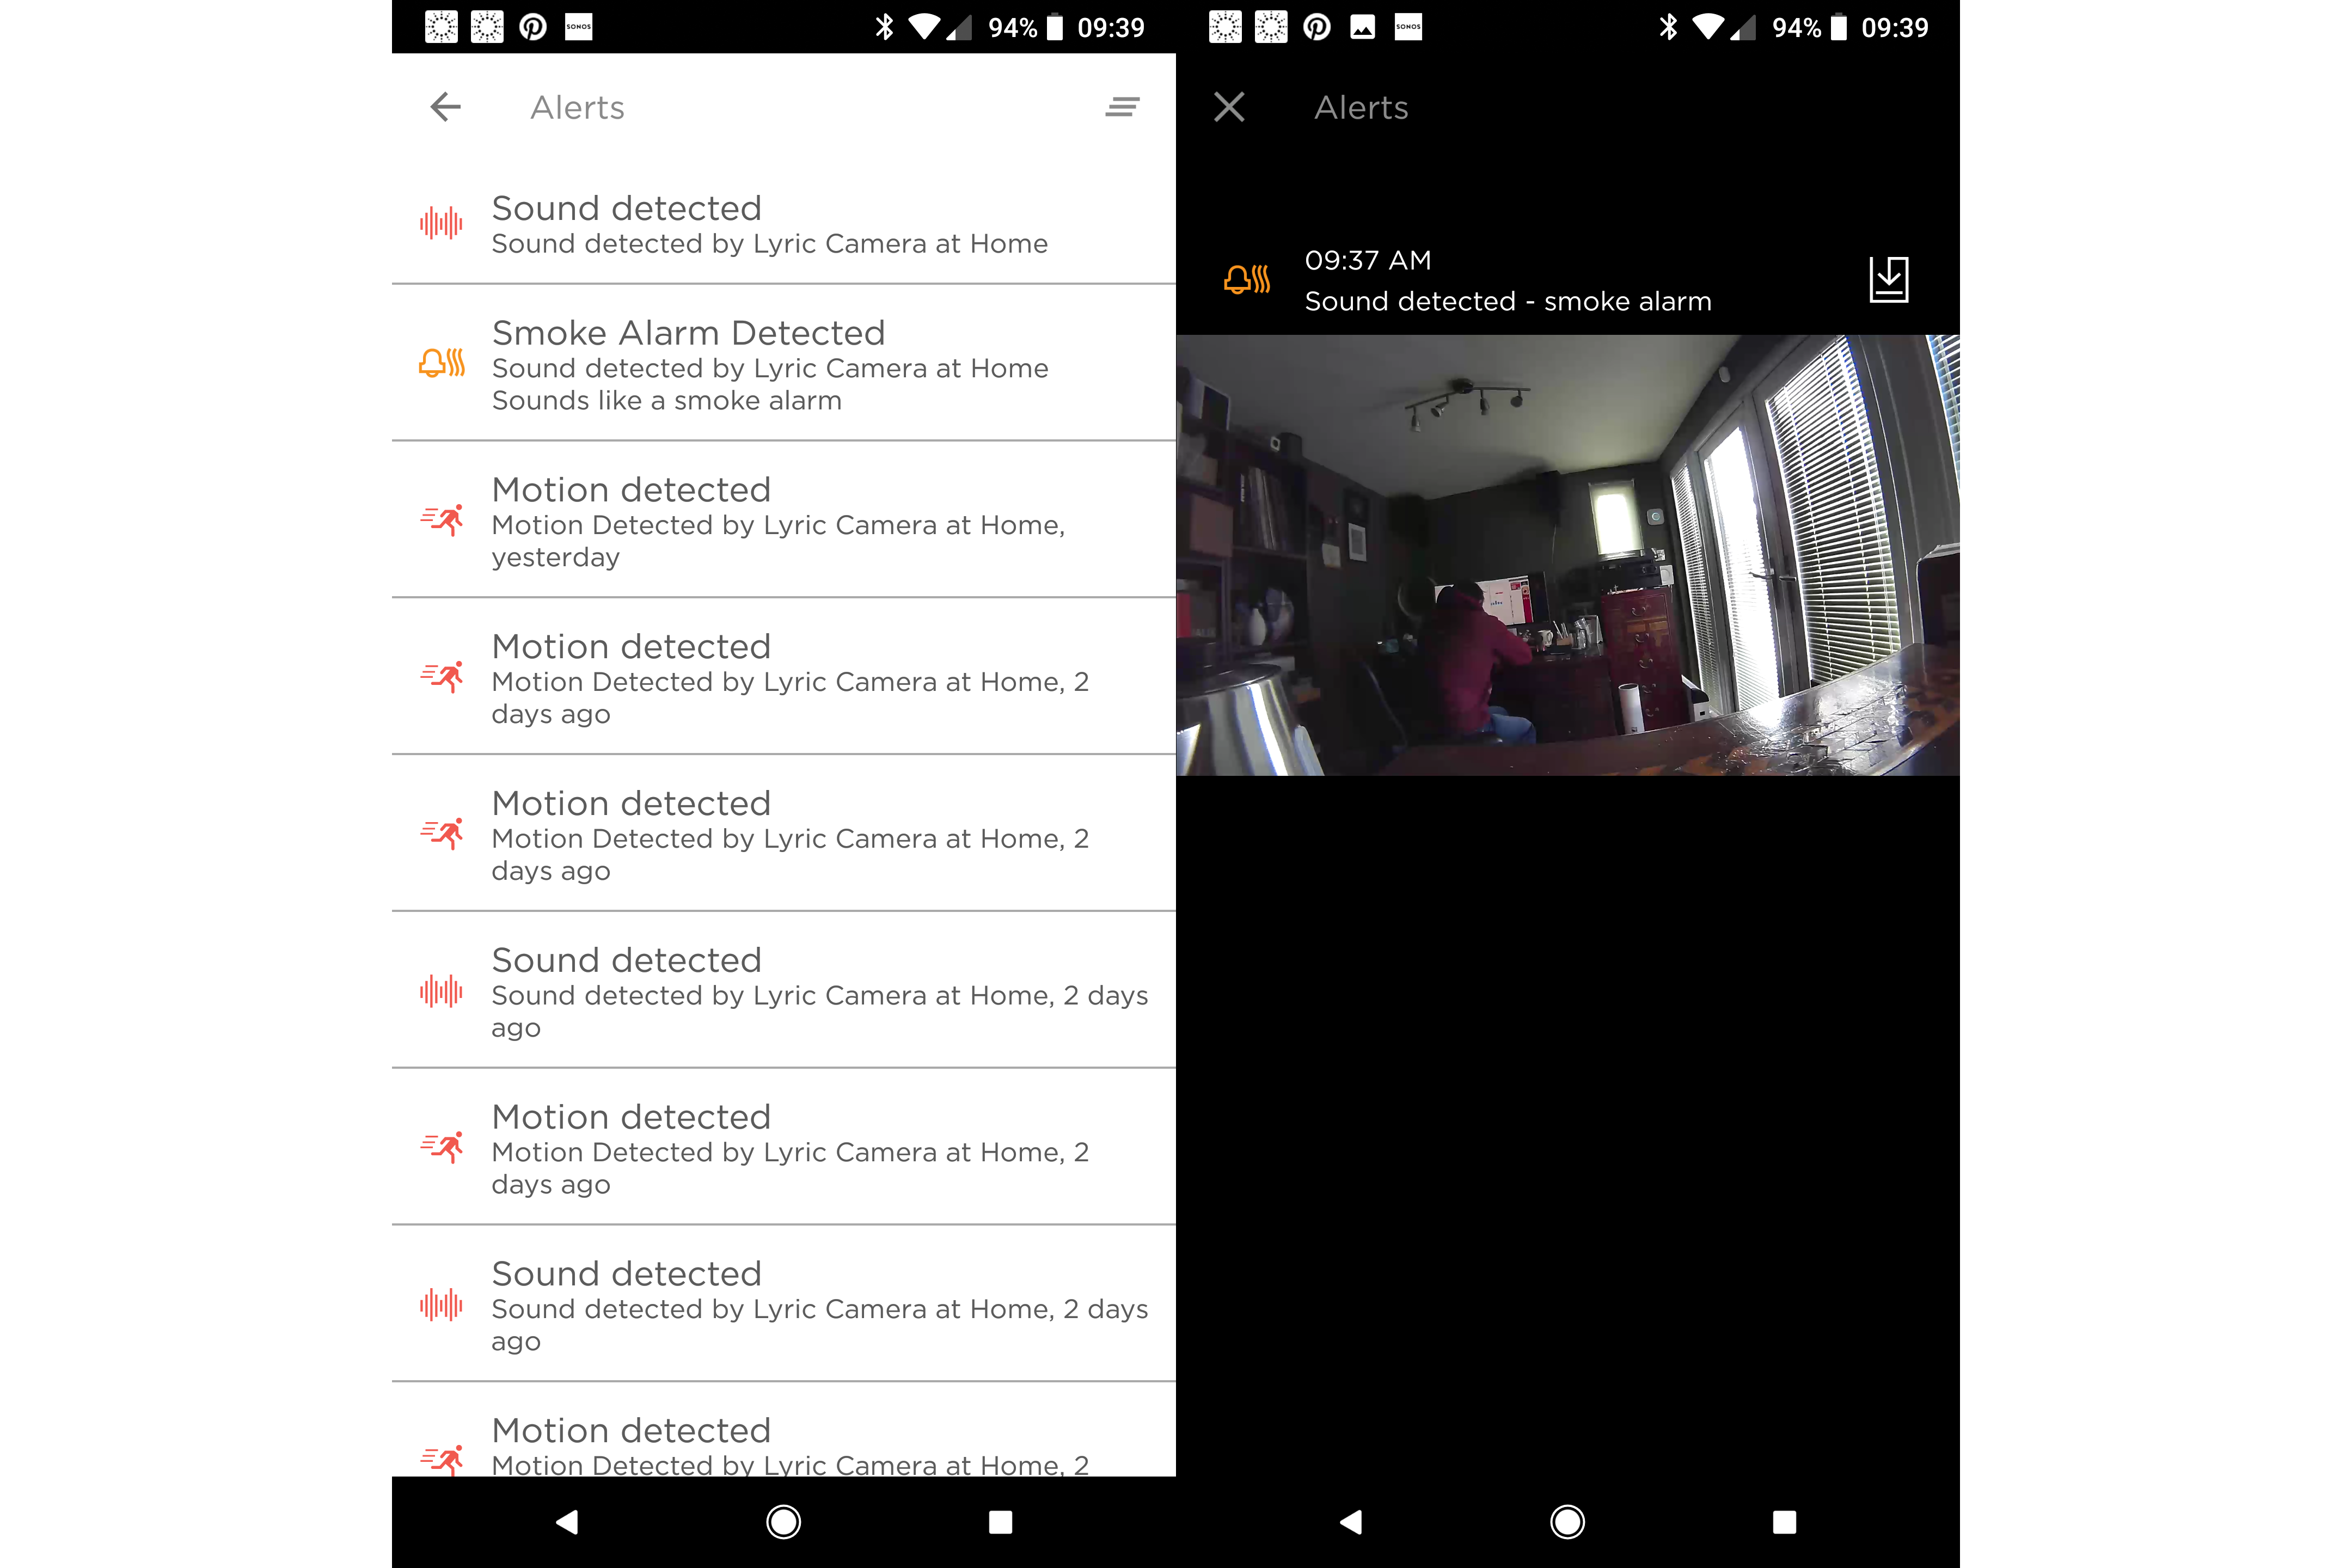 Honeywell Lyric C2 app alerts and camera view of a room.